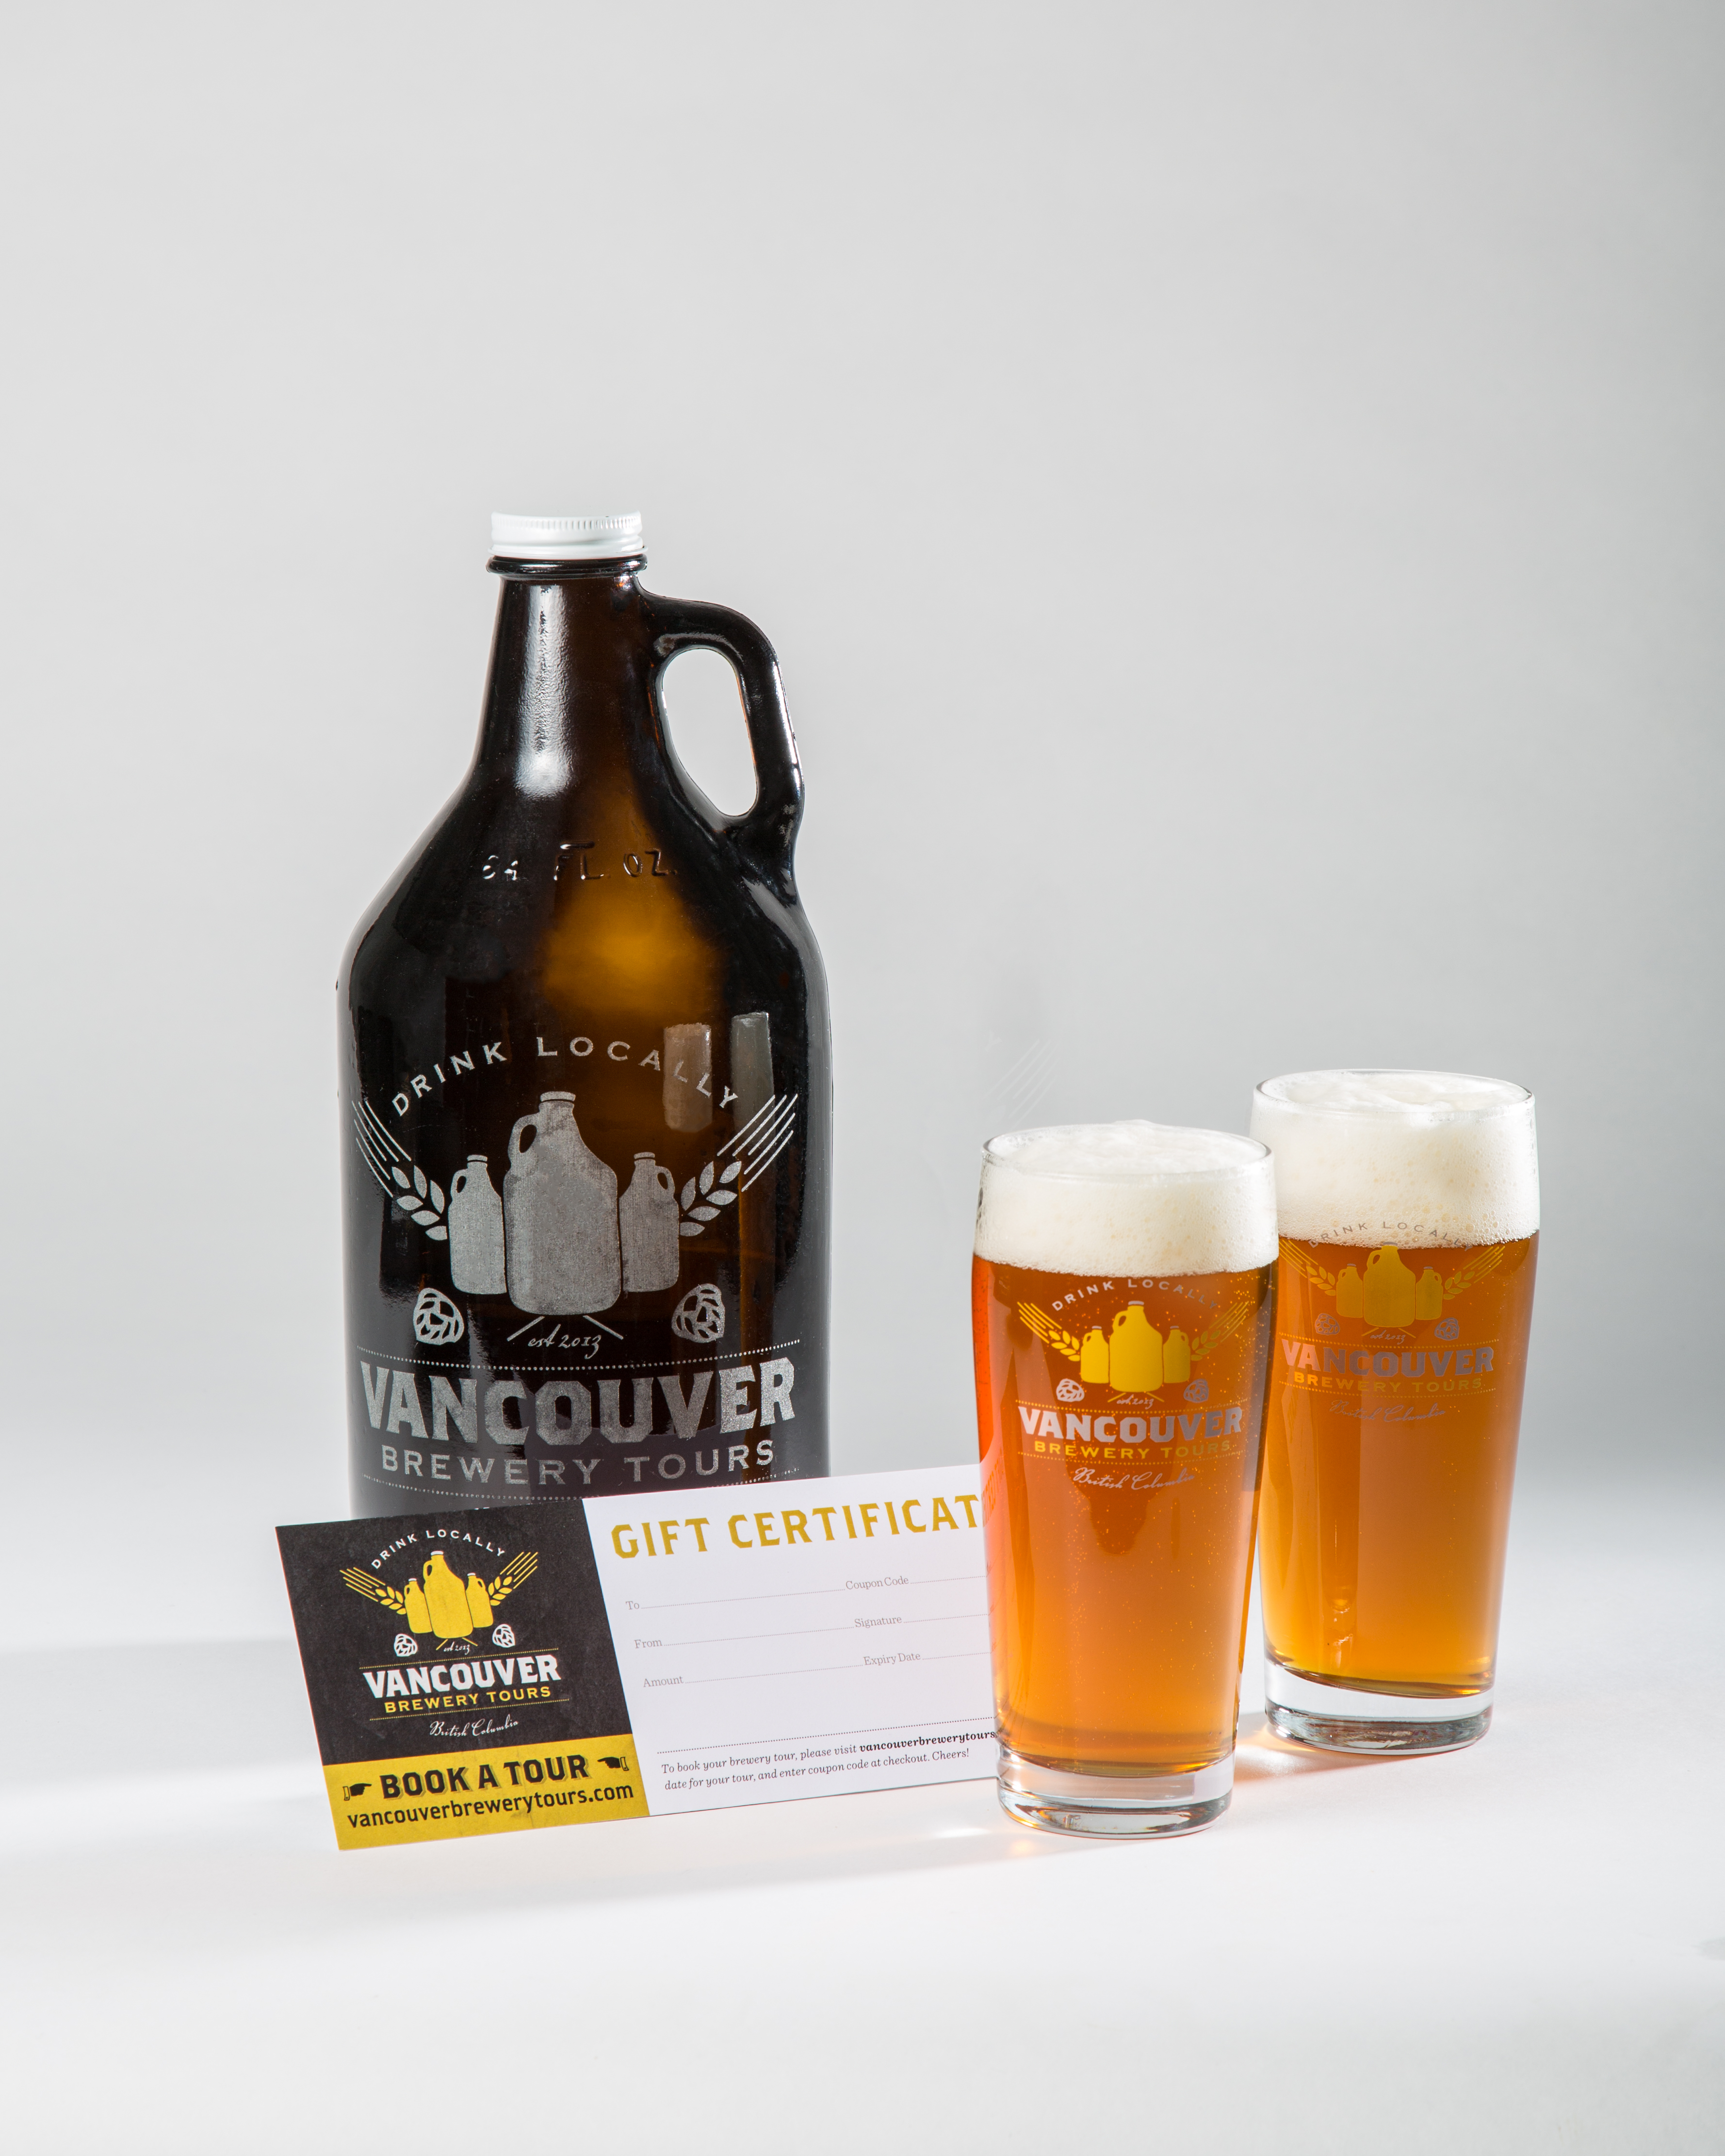 Vancouver Holiday Gift Idea - Brewery Tours Gift Certificate